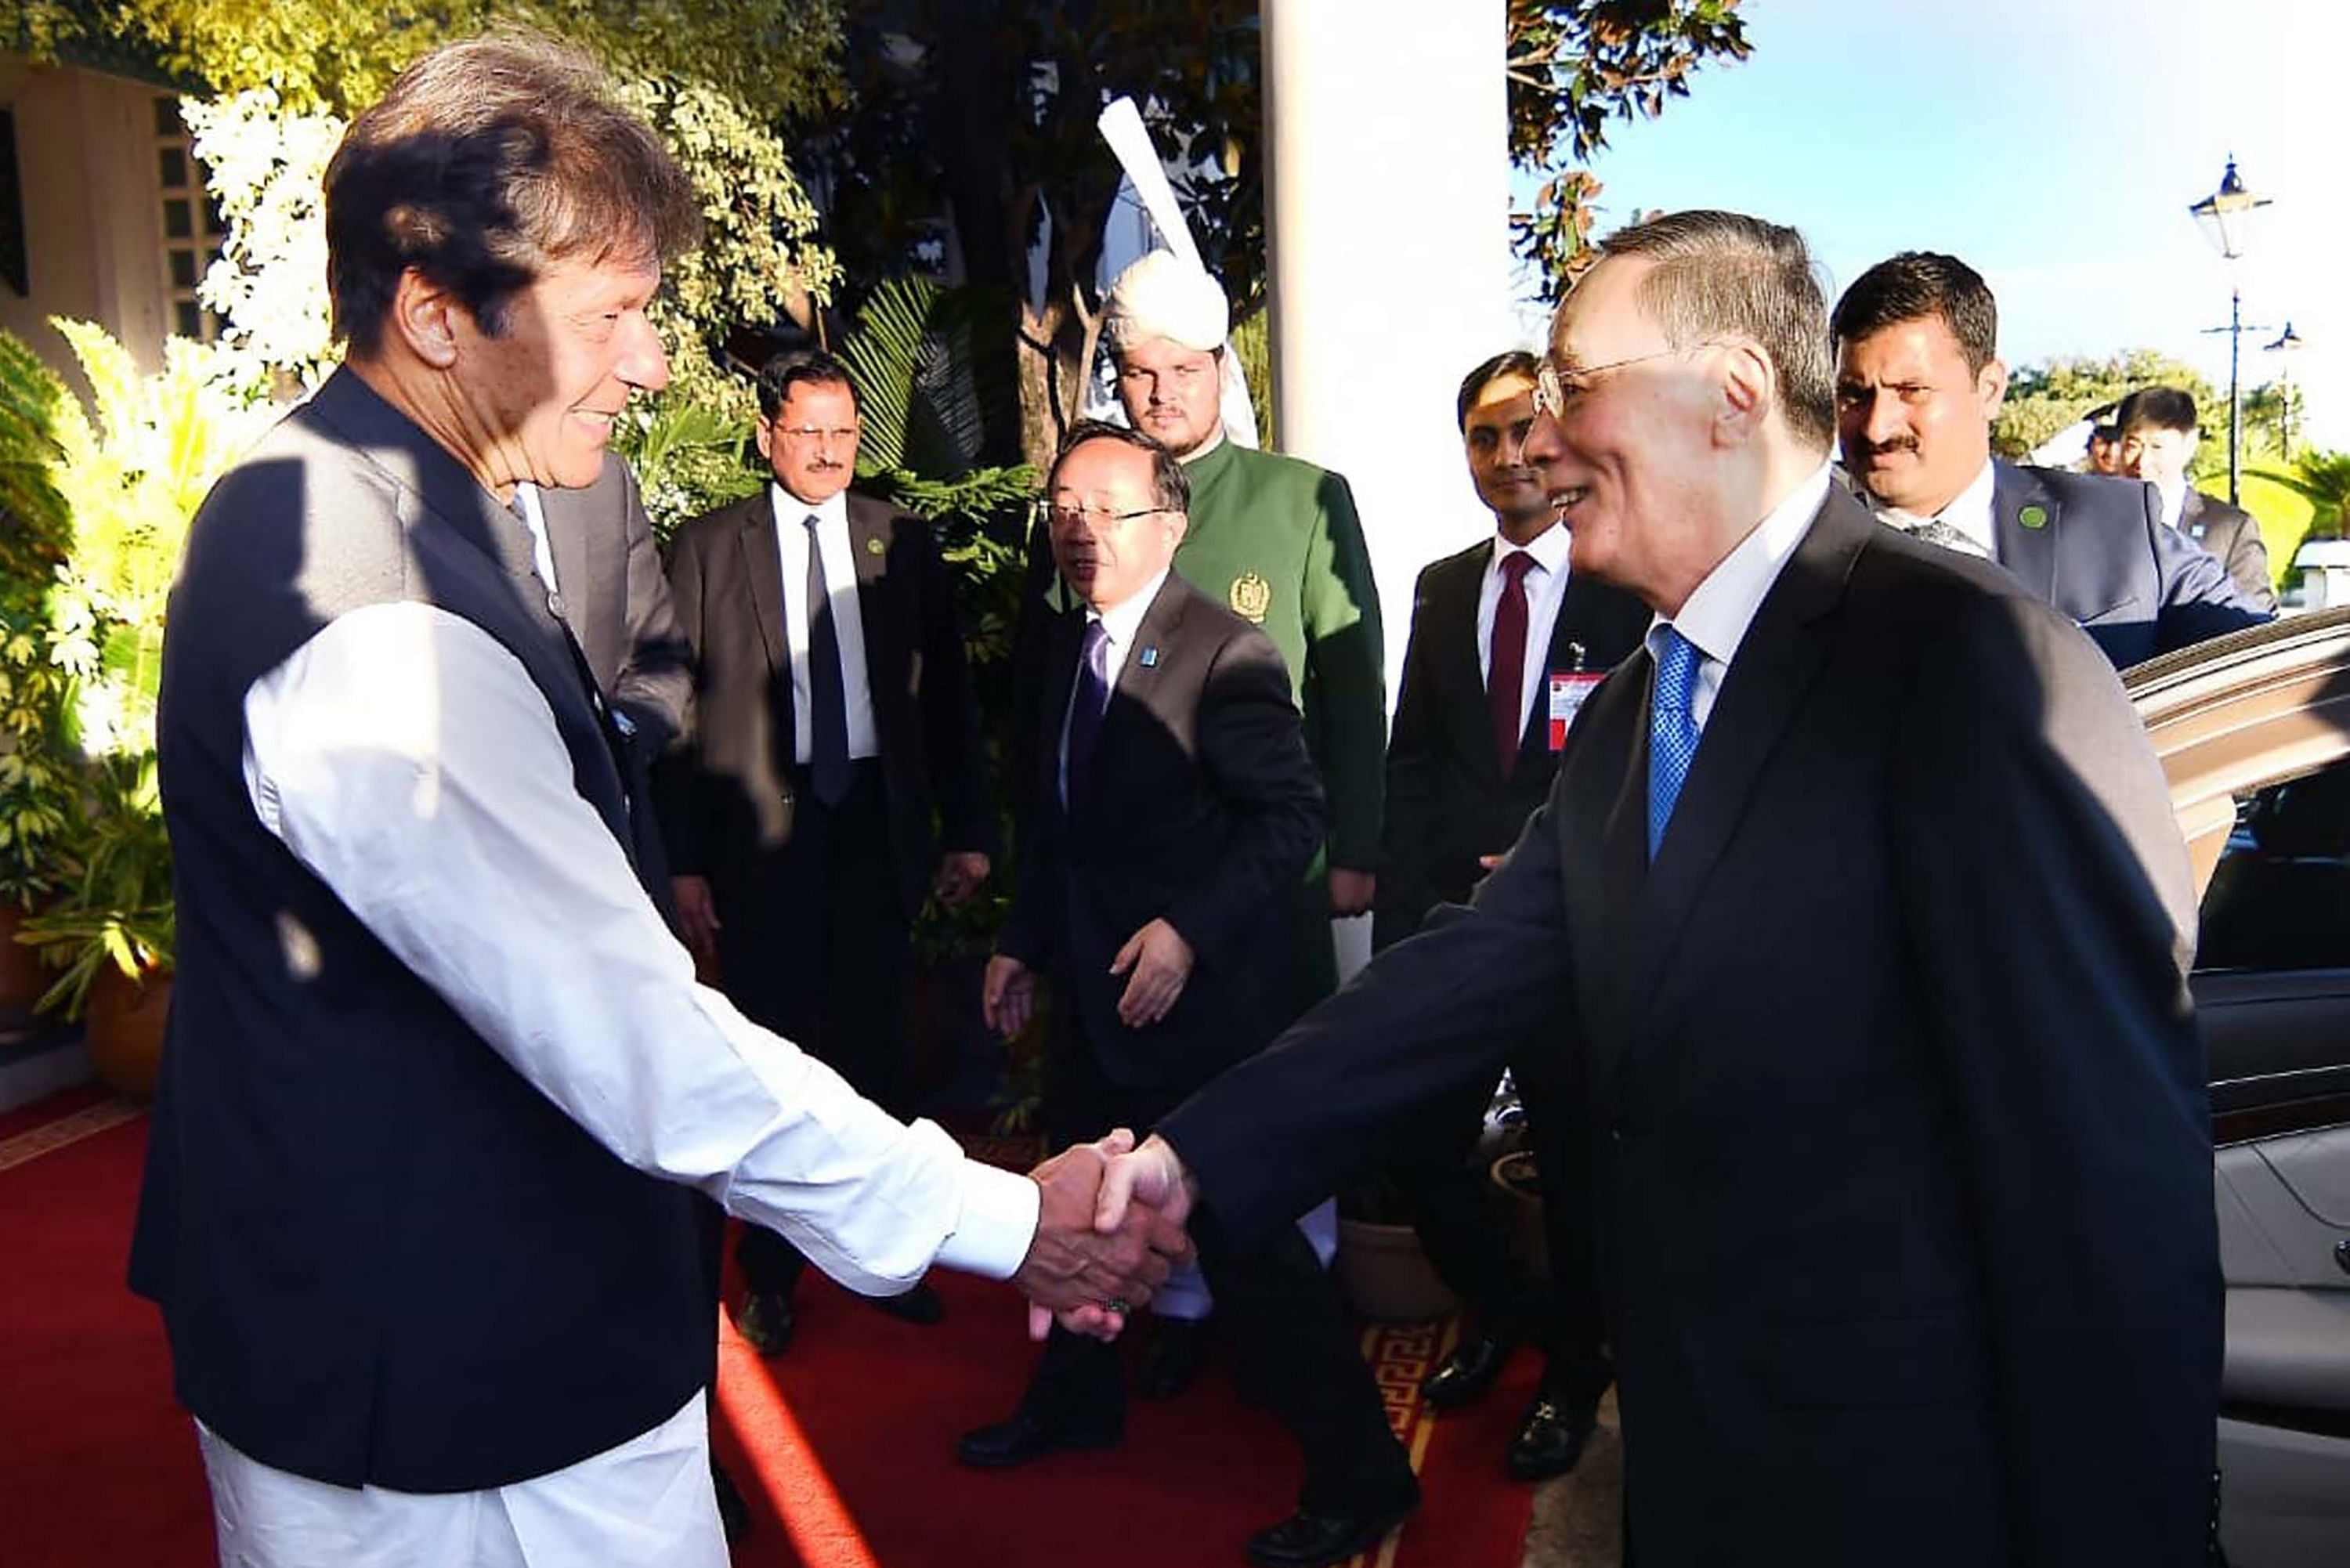 Pakistani Prime Minister Imran Khan (L) shaking hands with Chinese Vice President Wang Qishan on his arrival for a meeting in Islamabad. (AFP file photo)